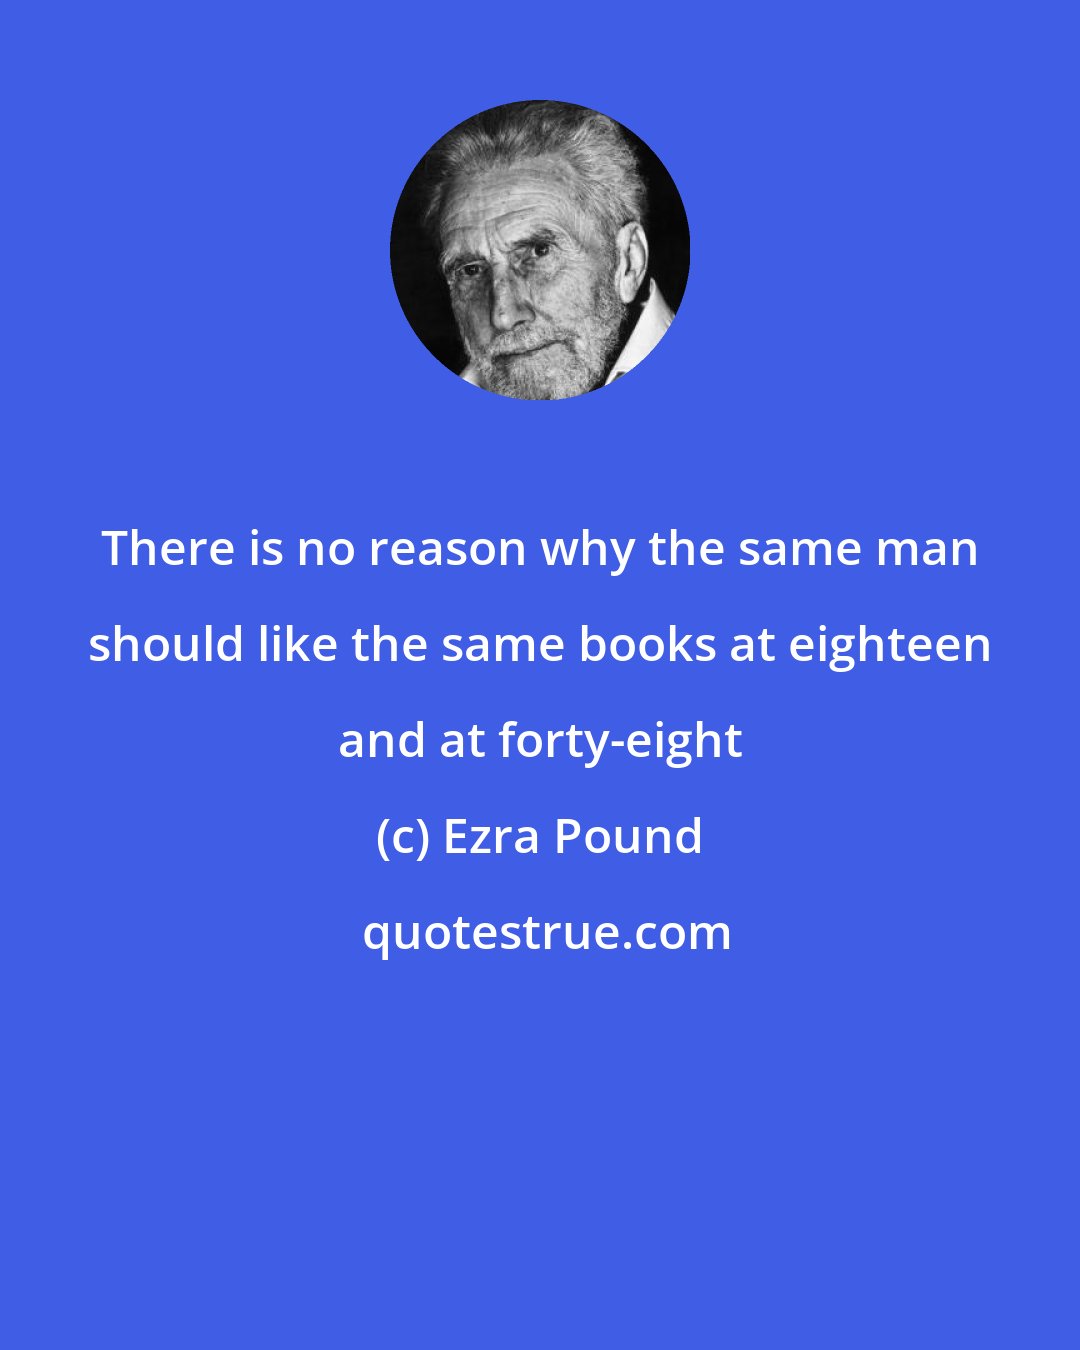 Ezra Pound: There is no reason why the same man should like the same books at eighteen and at forty-eight